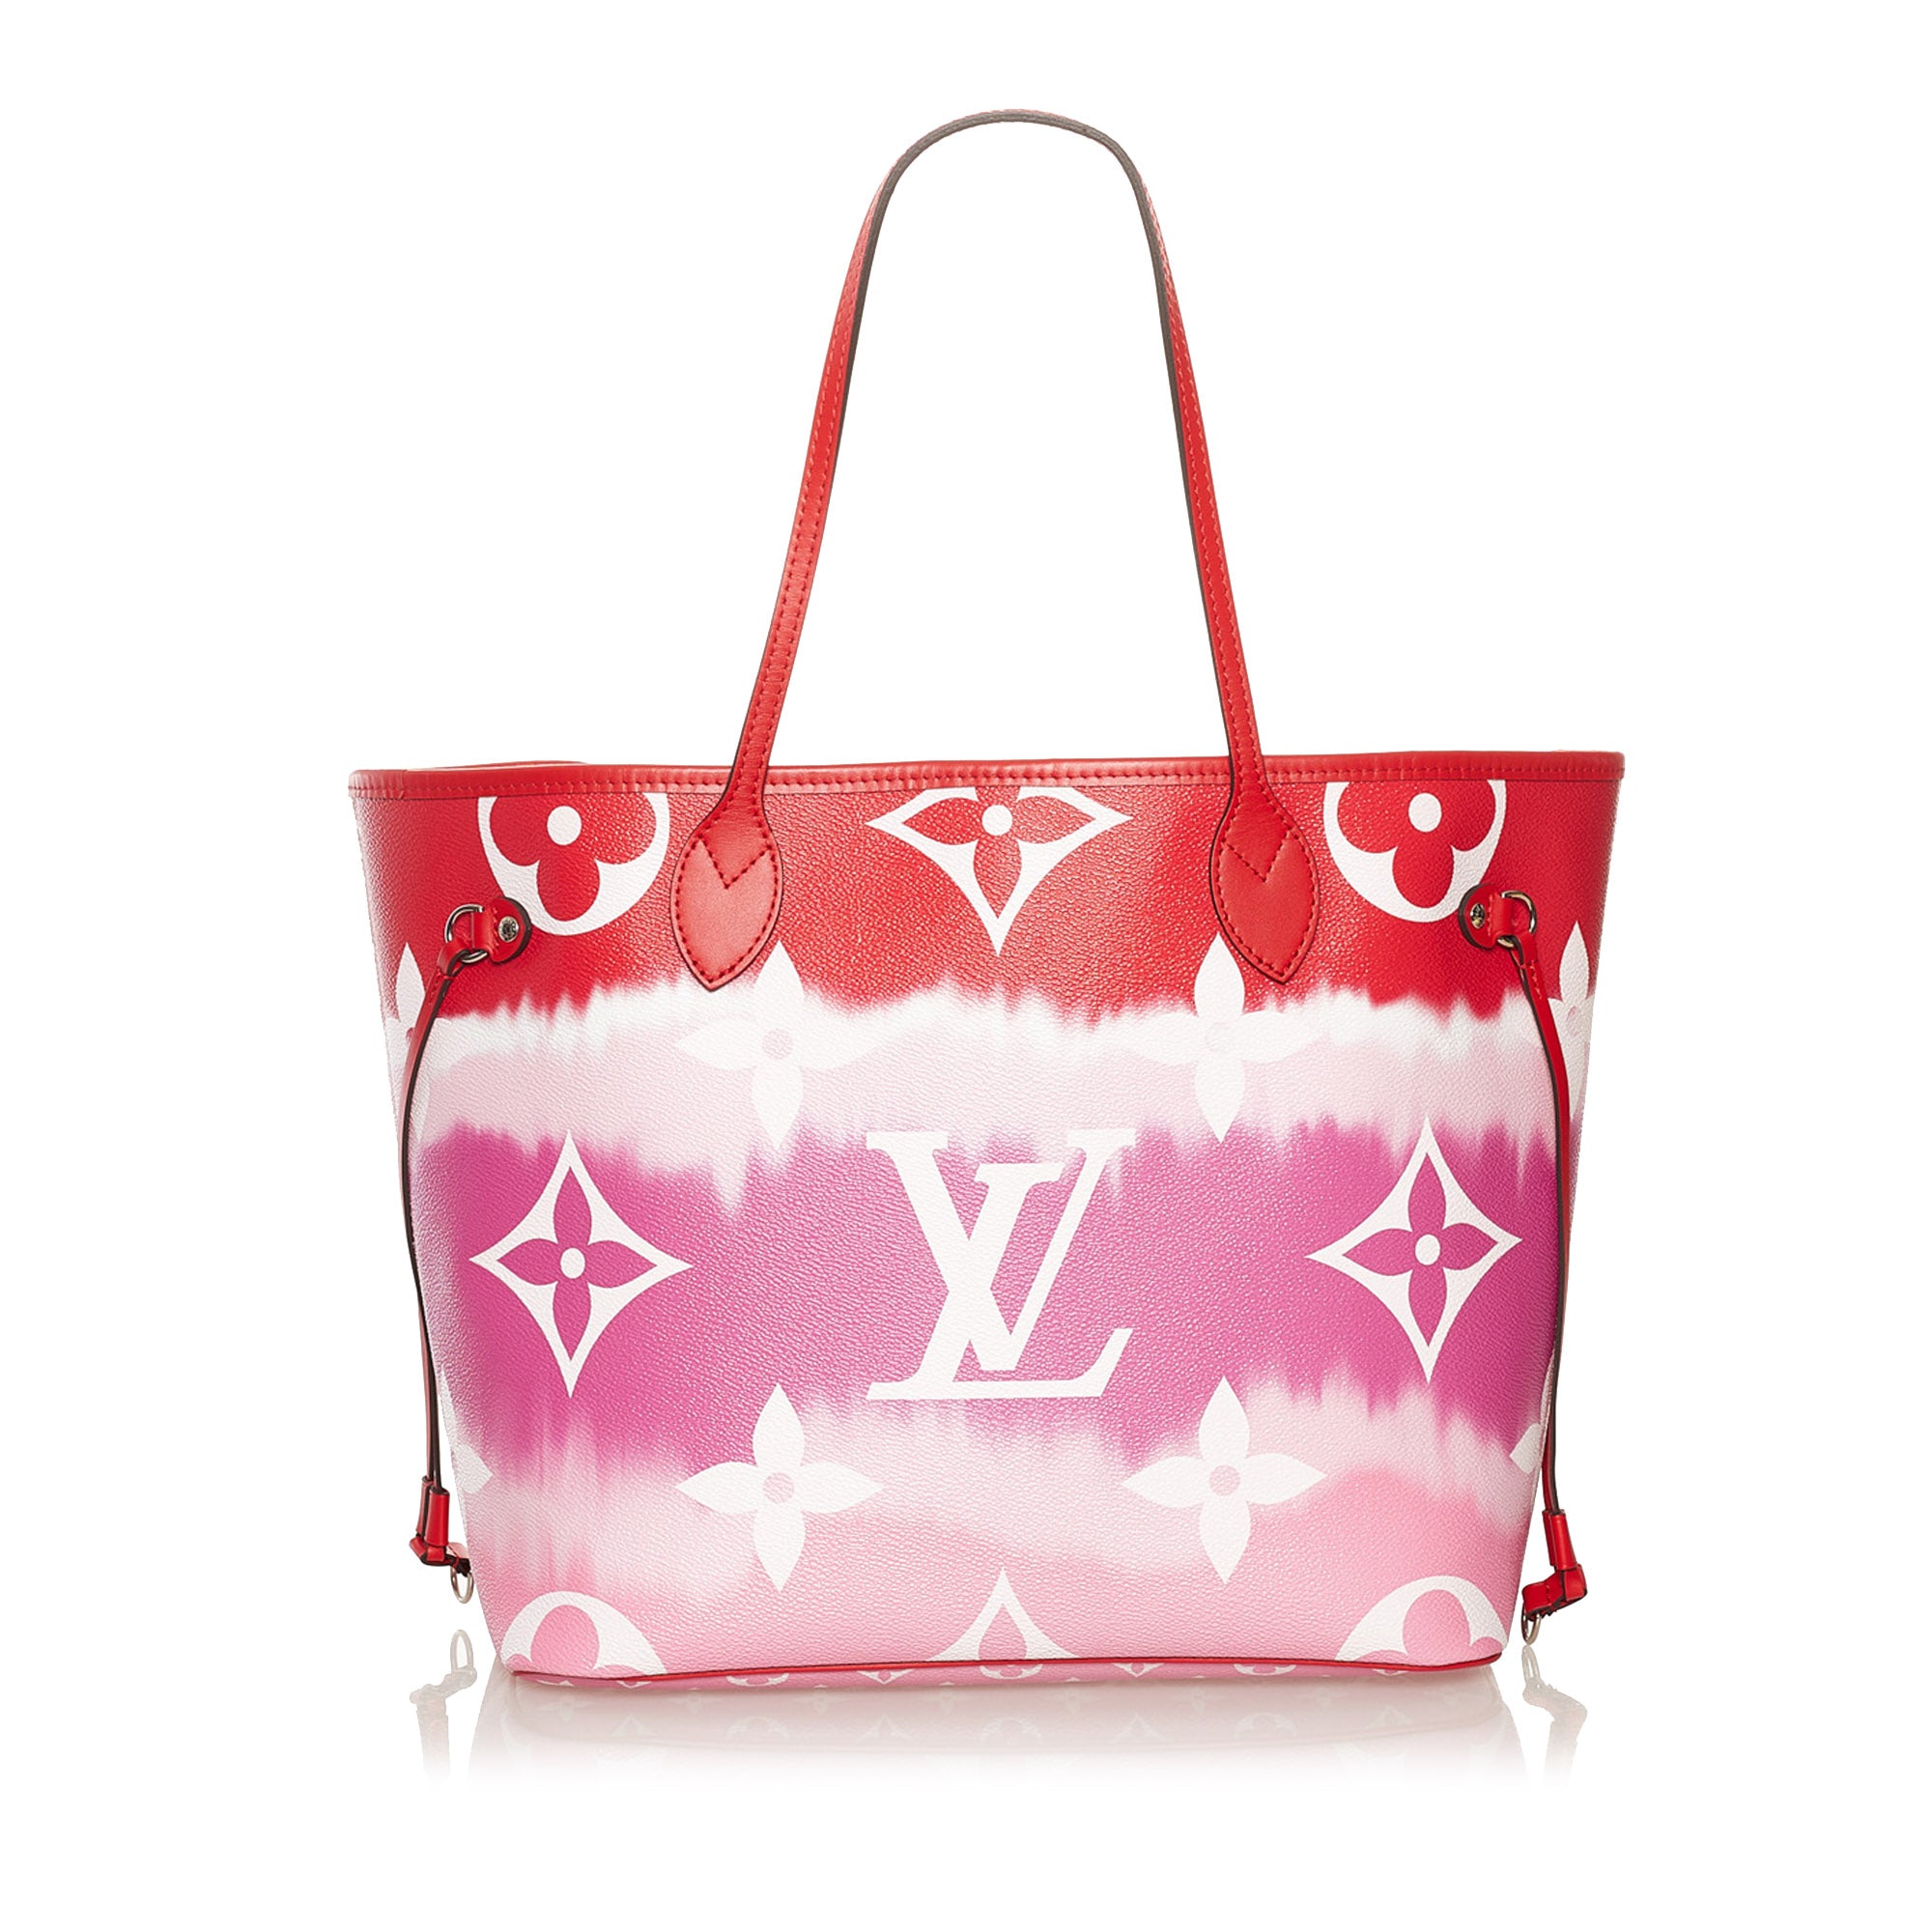 louis vuitton bags pink and white